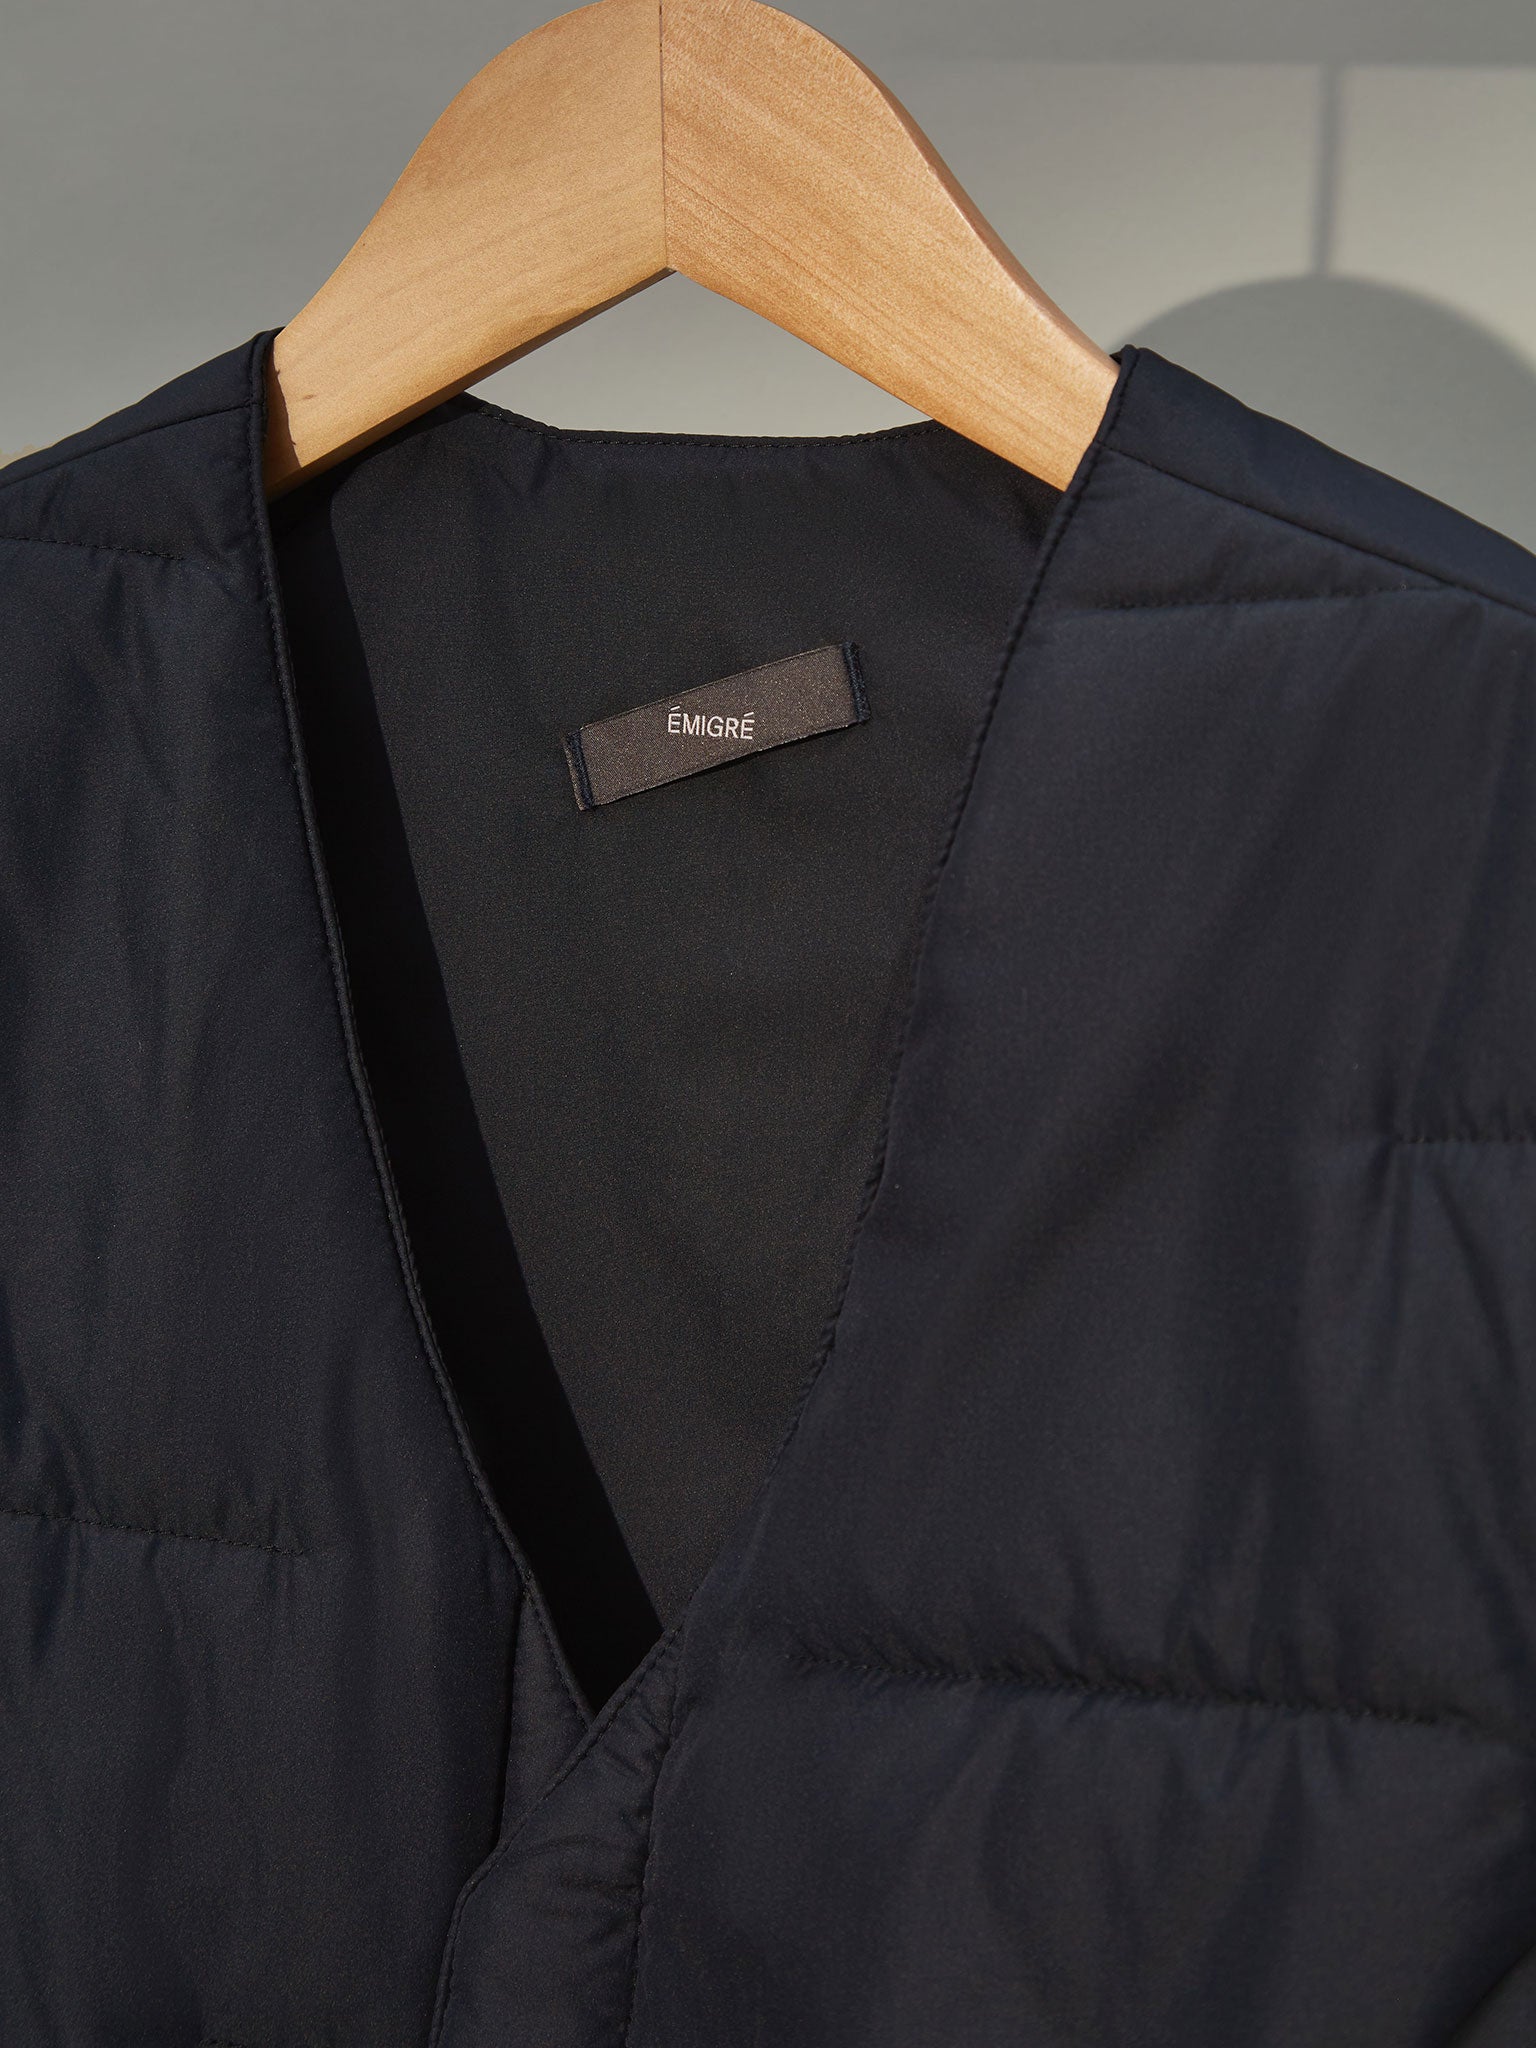 The Perfect navy Blue Gilet for Men - Fashionable and Functional All Year Round